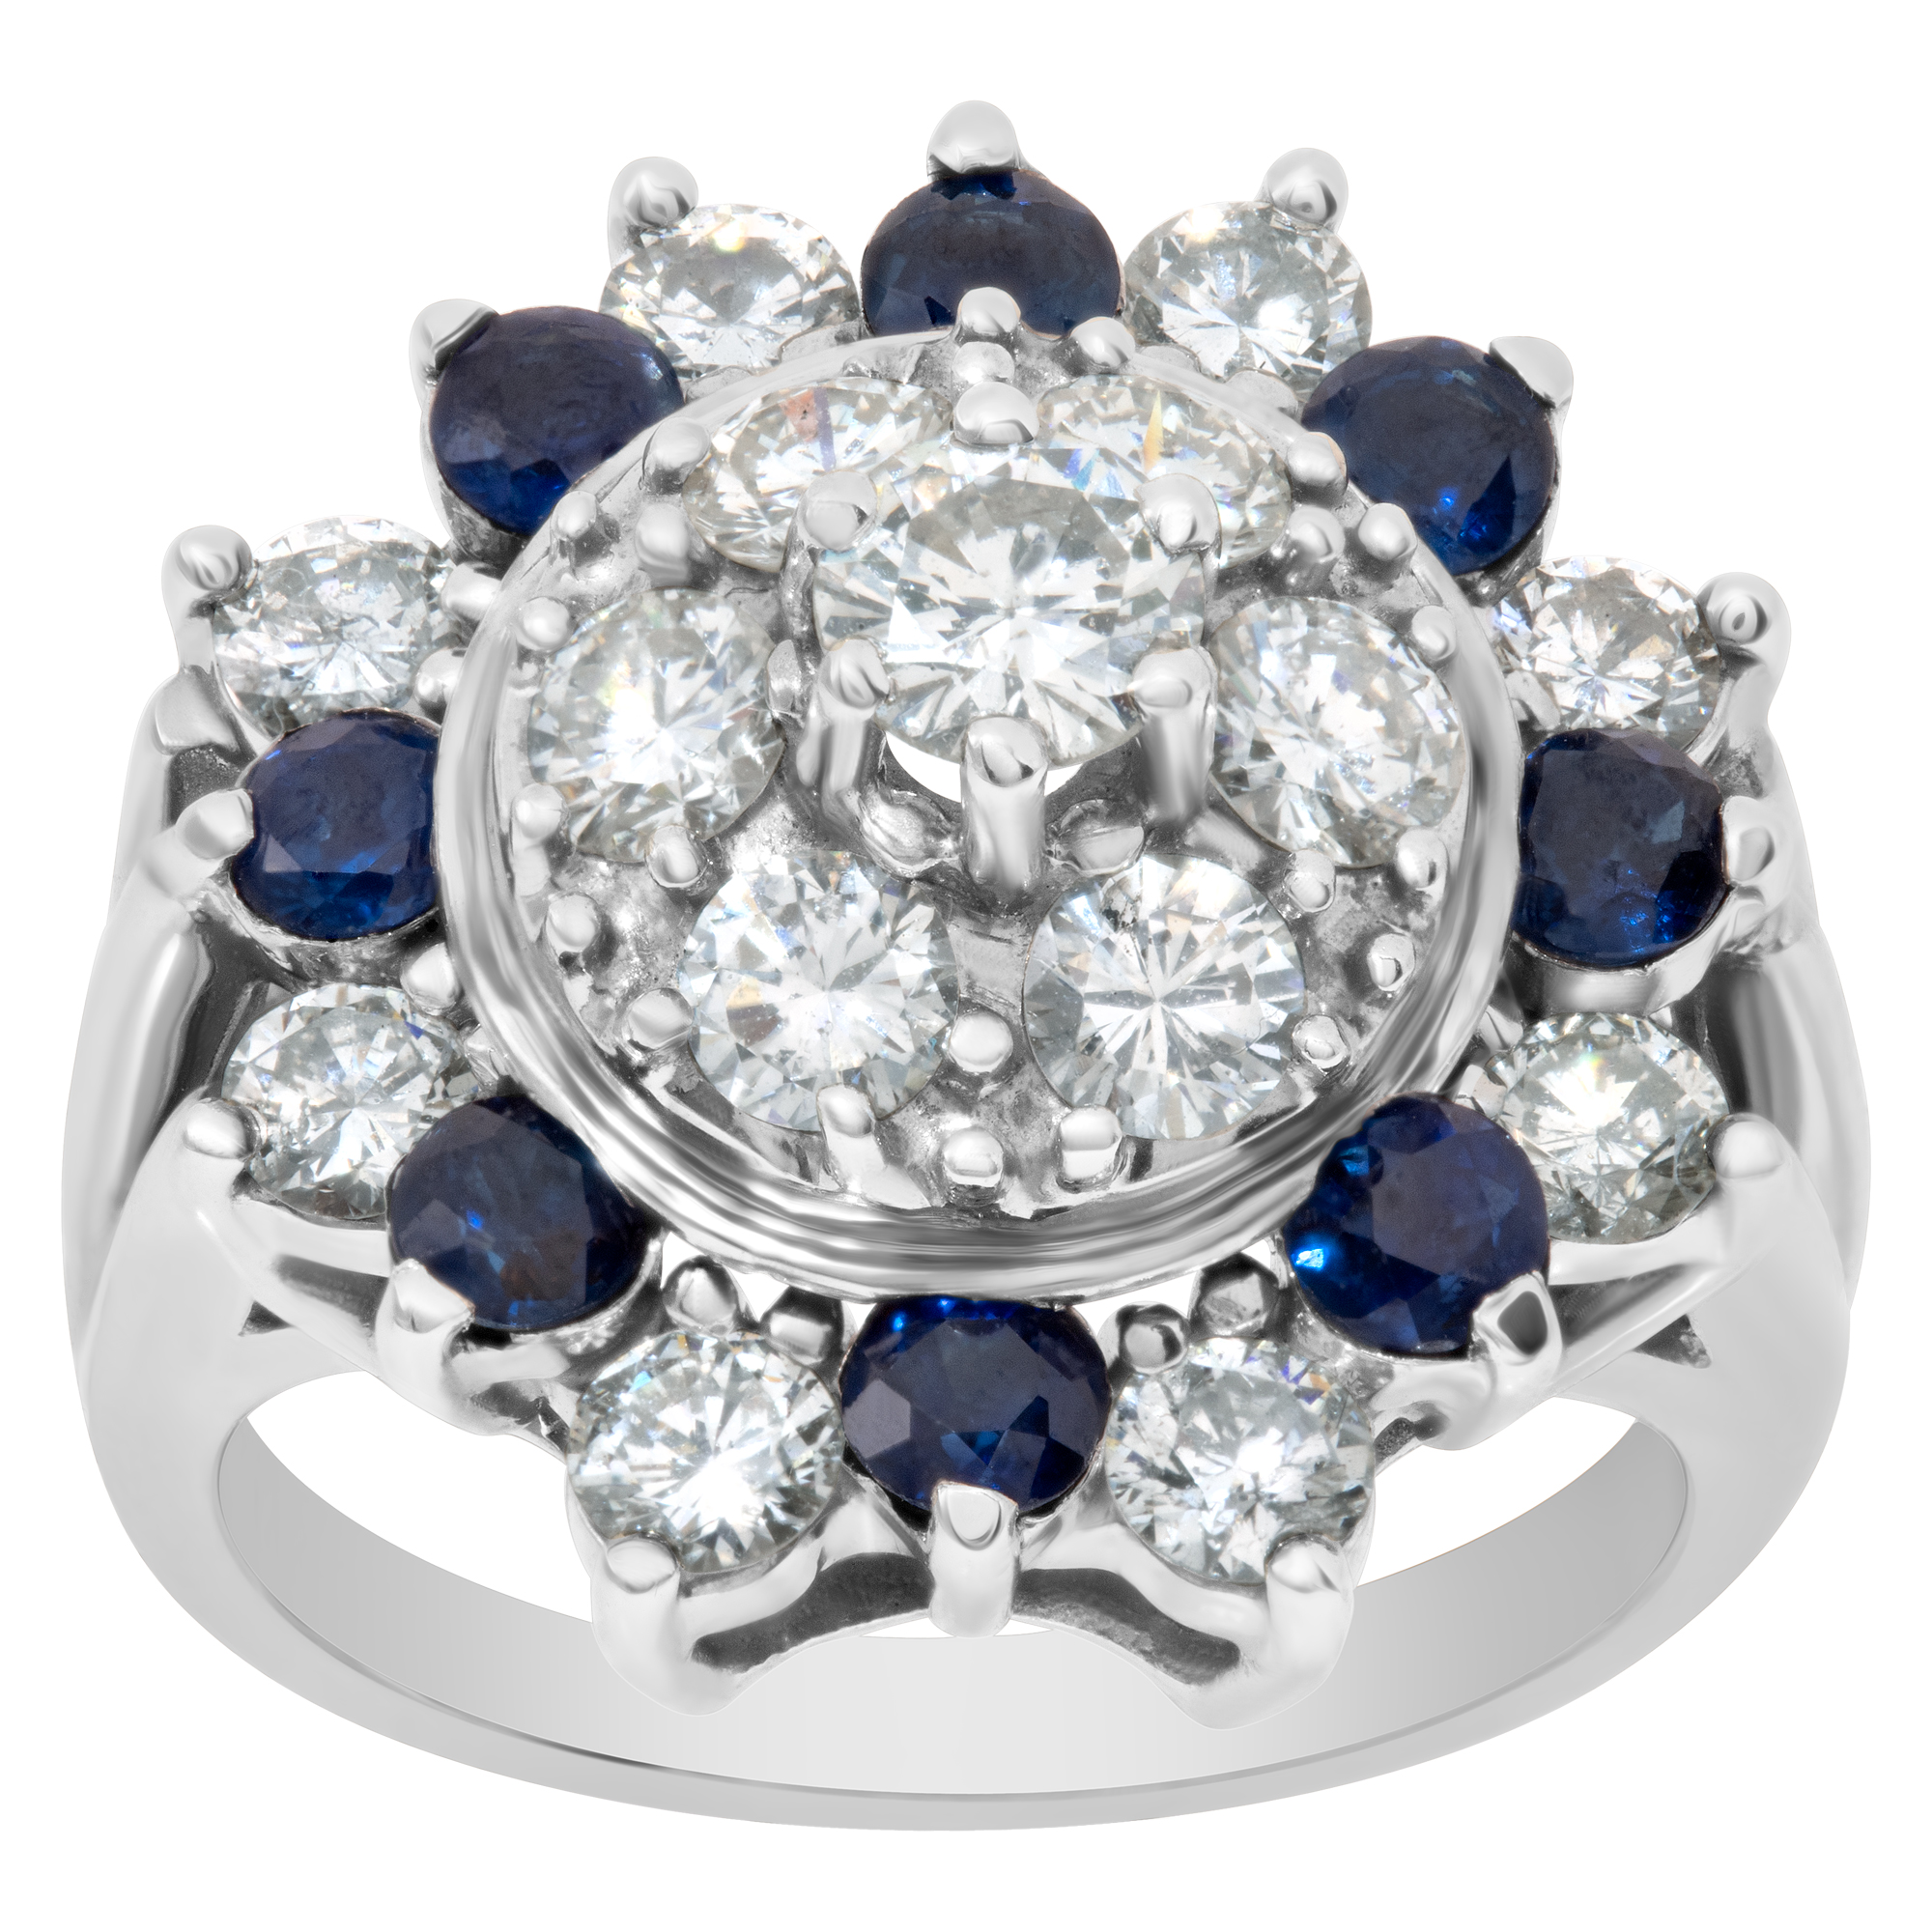 Vintage diamonds and sapphire ring set in 14K white gold. Round brilliant cut diamonds total approx weight: 1.50 carat image 1